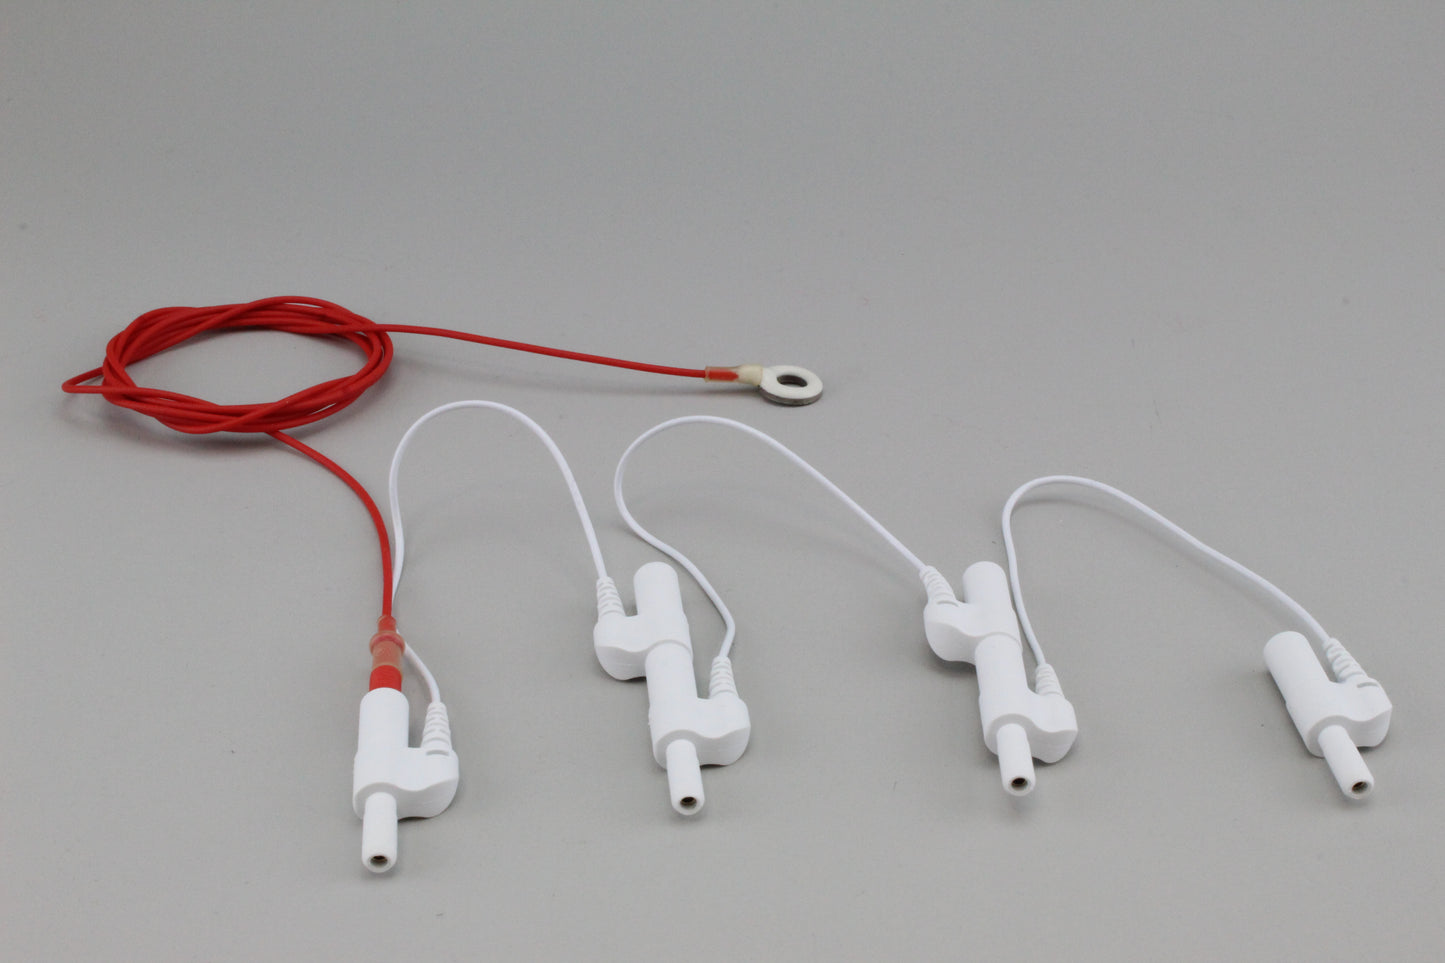 Touch-proof shorting cable